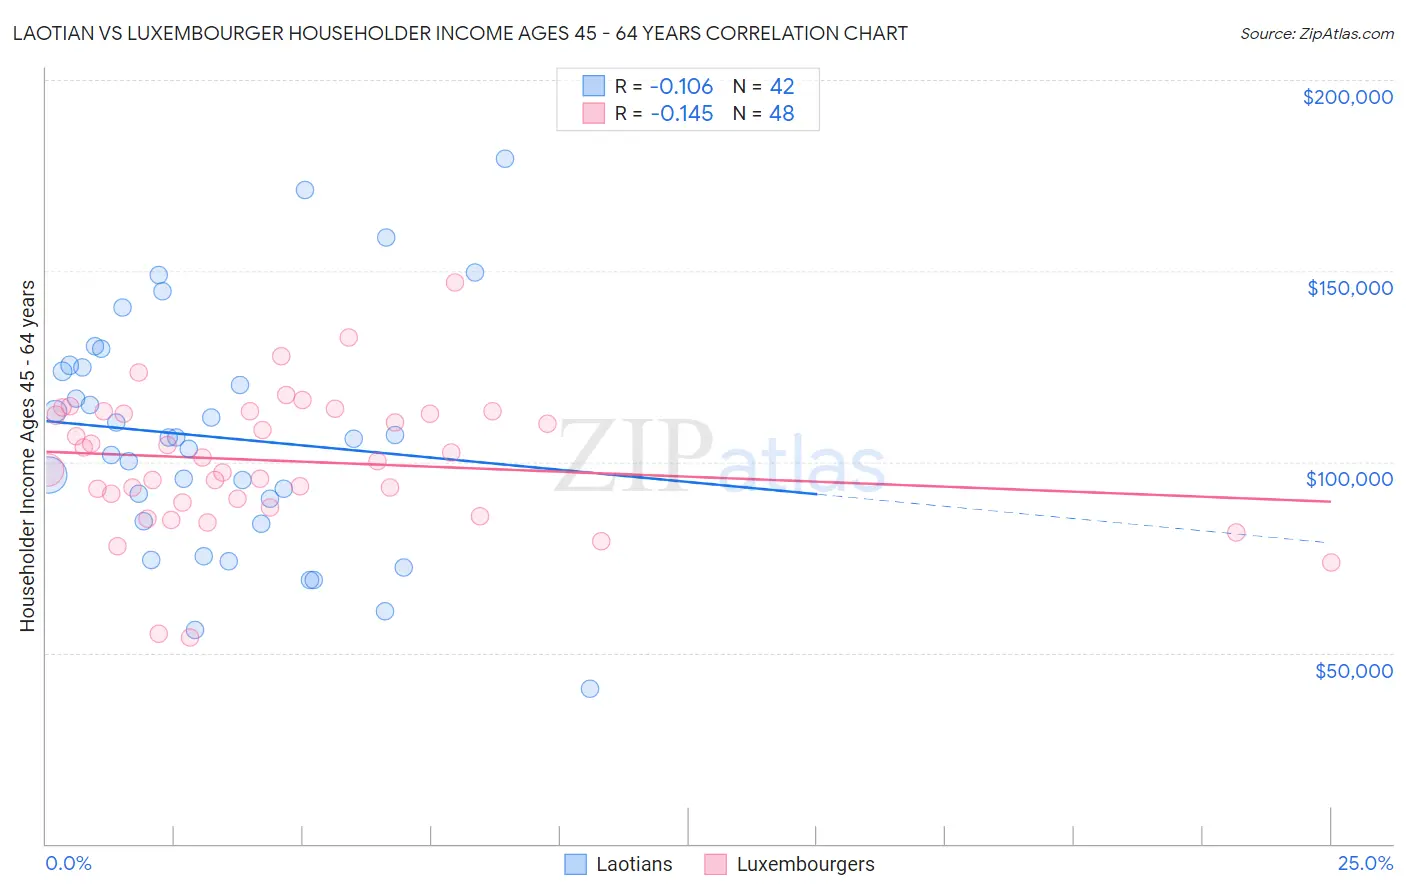 Laotian vs Luxembourger Householder Income Ages 45 - 64 years